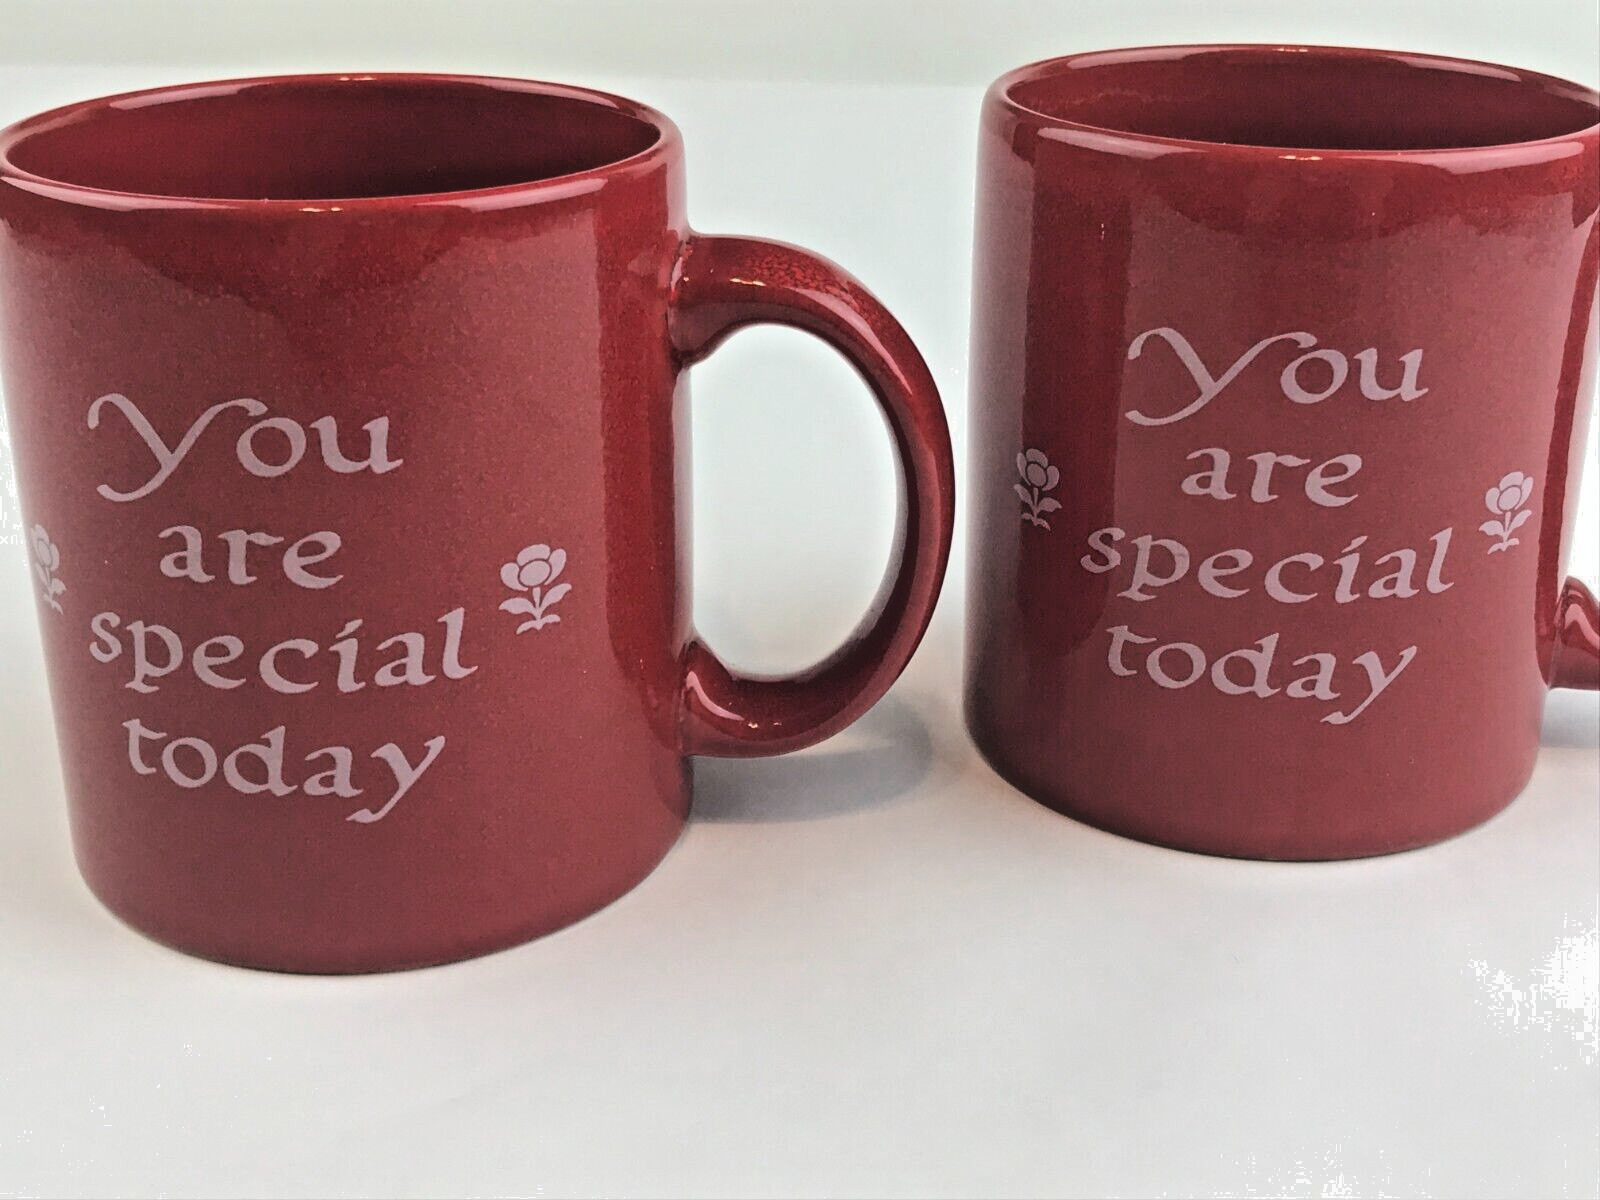 Lot of 2 You Are Special Today Red Ceramic Coffee Mugs Waechtersbach Germany